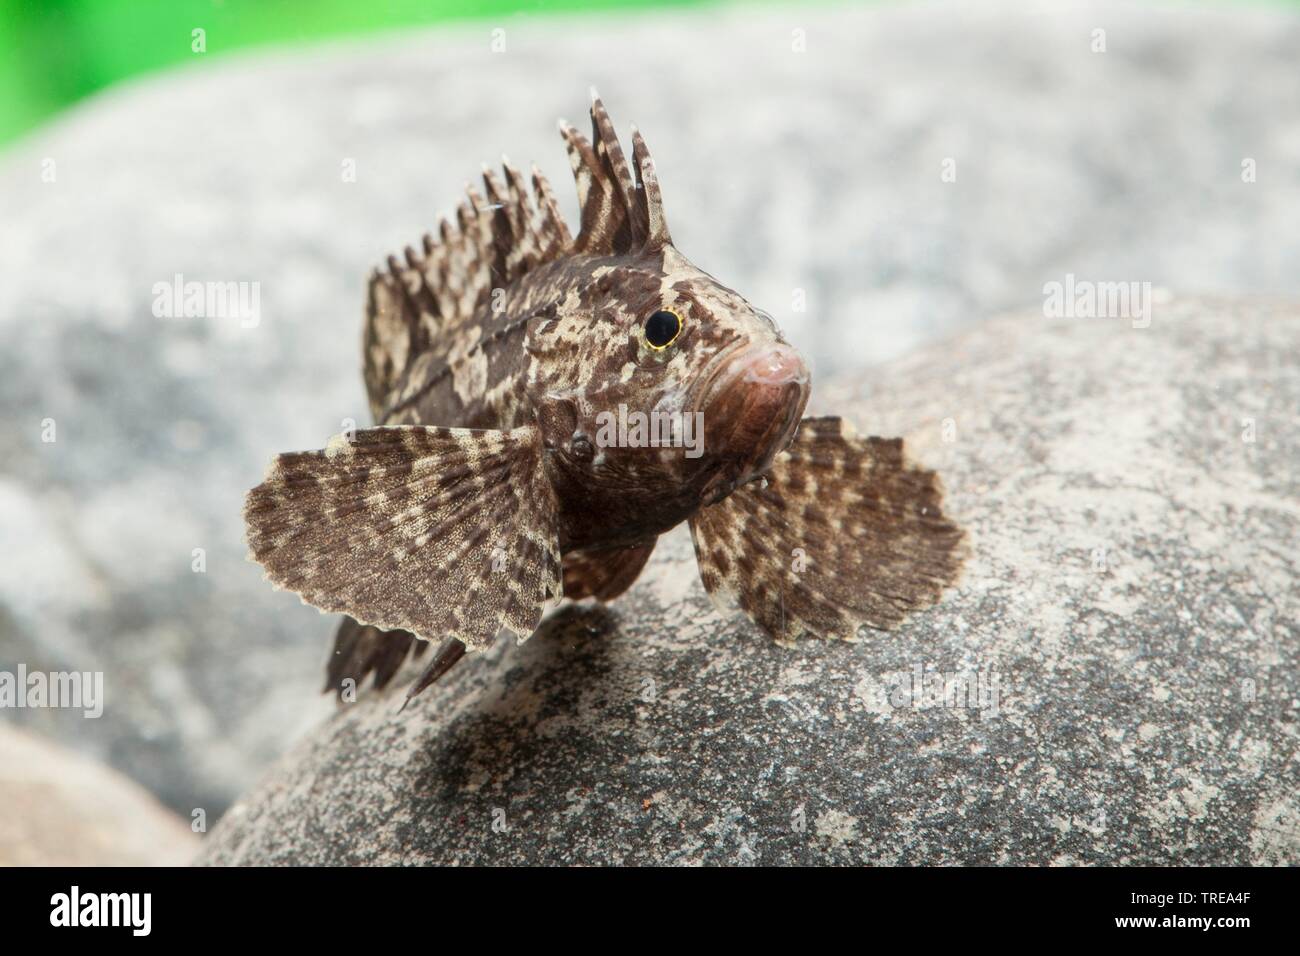 leaf goblinfish (Neovespicula depressifrons), on a stone under water Stock Photo